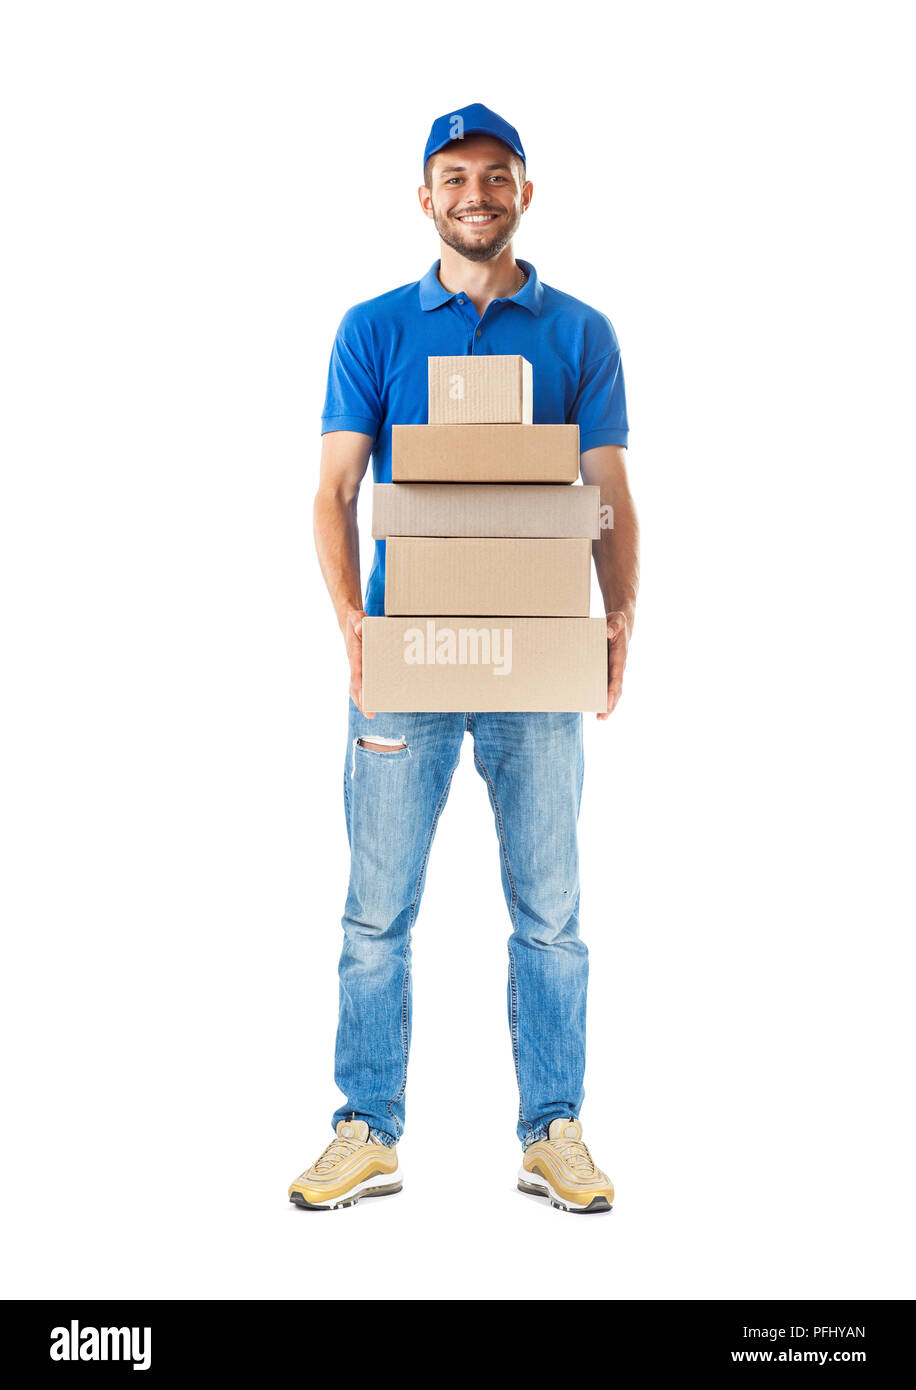 Full length portrait of confidence express courier holding pile of cardboard boxes isolated on white background Stock Photo